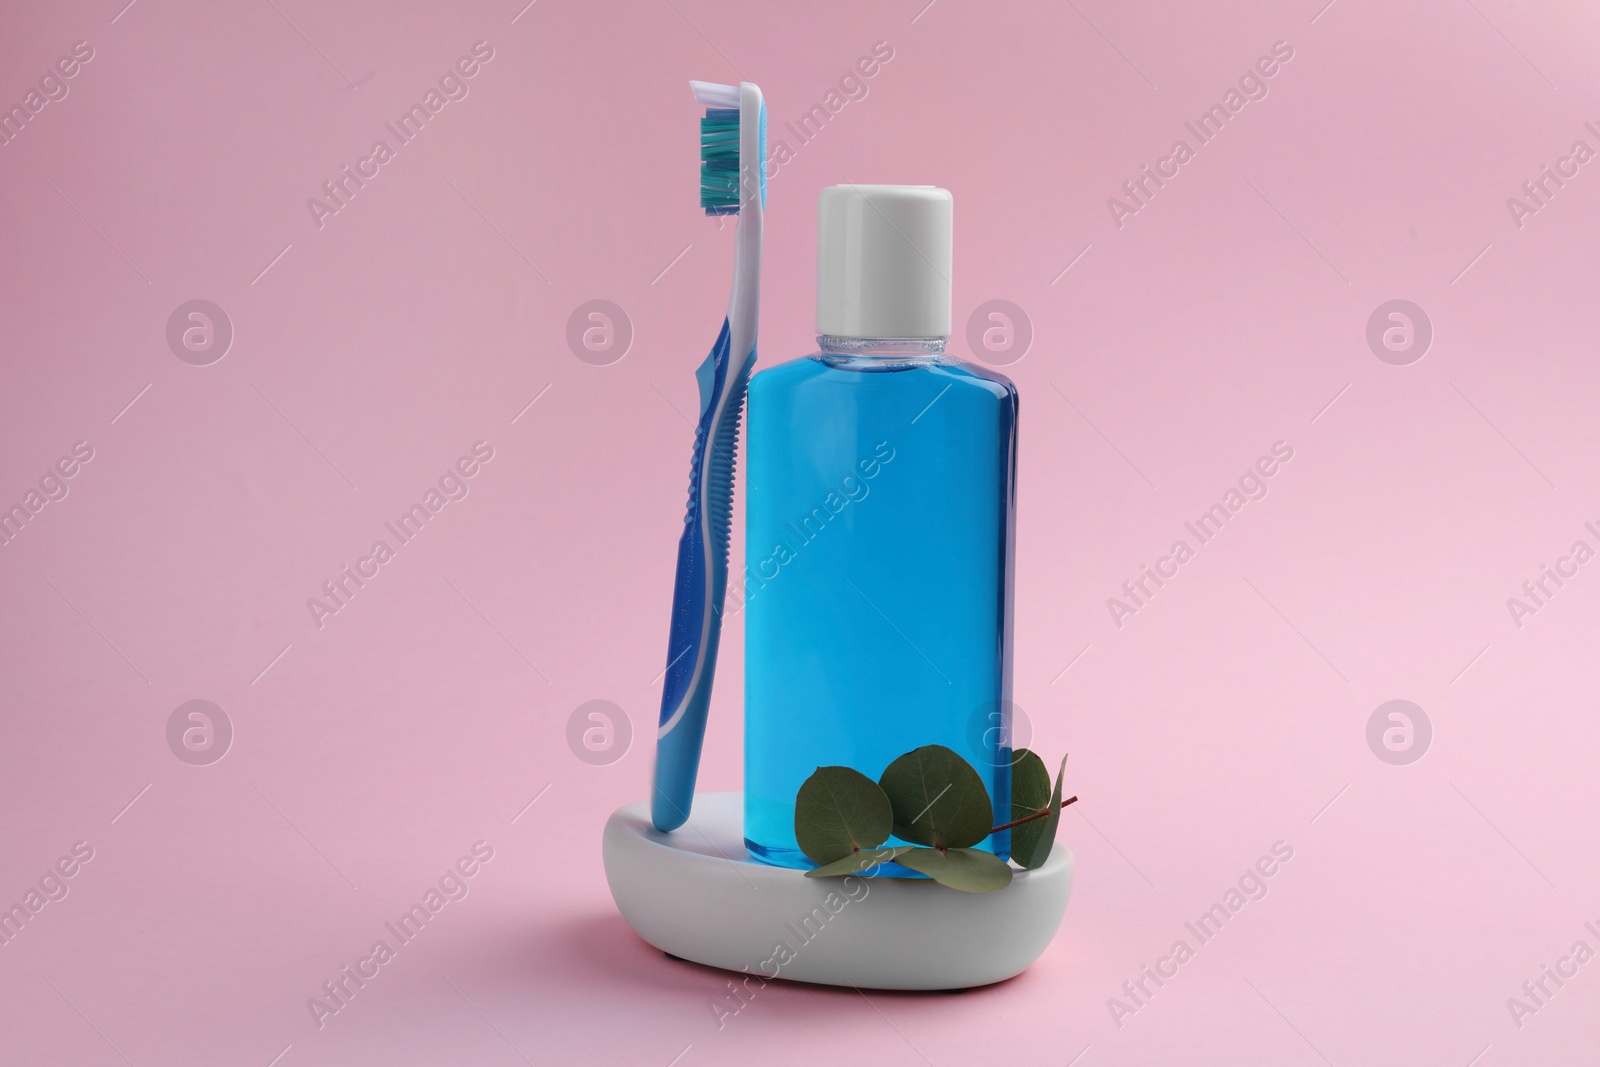 Photo of Fresh mouthwash in bottle and toothbrush on pink background, closeup